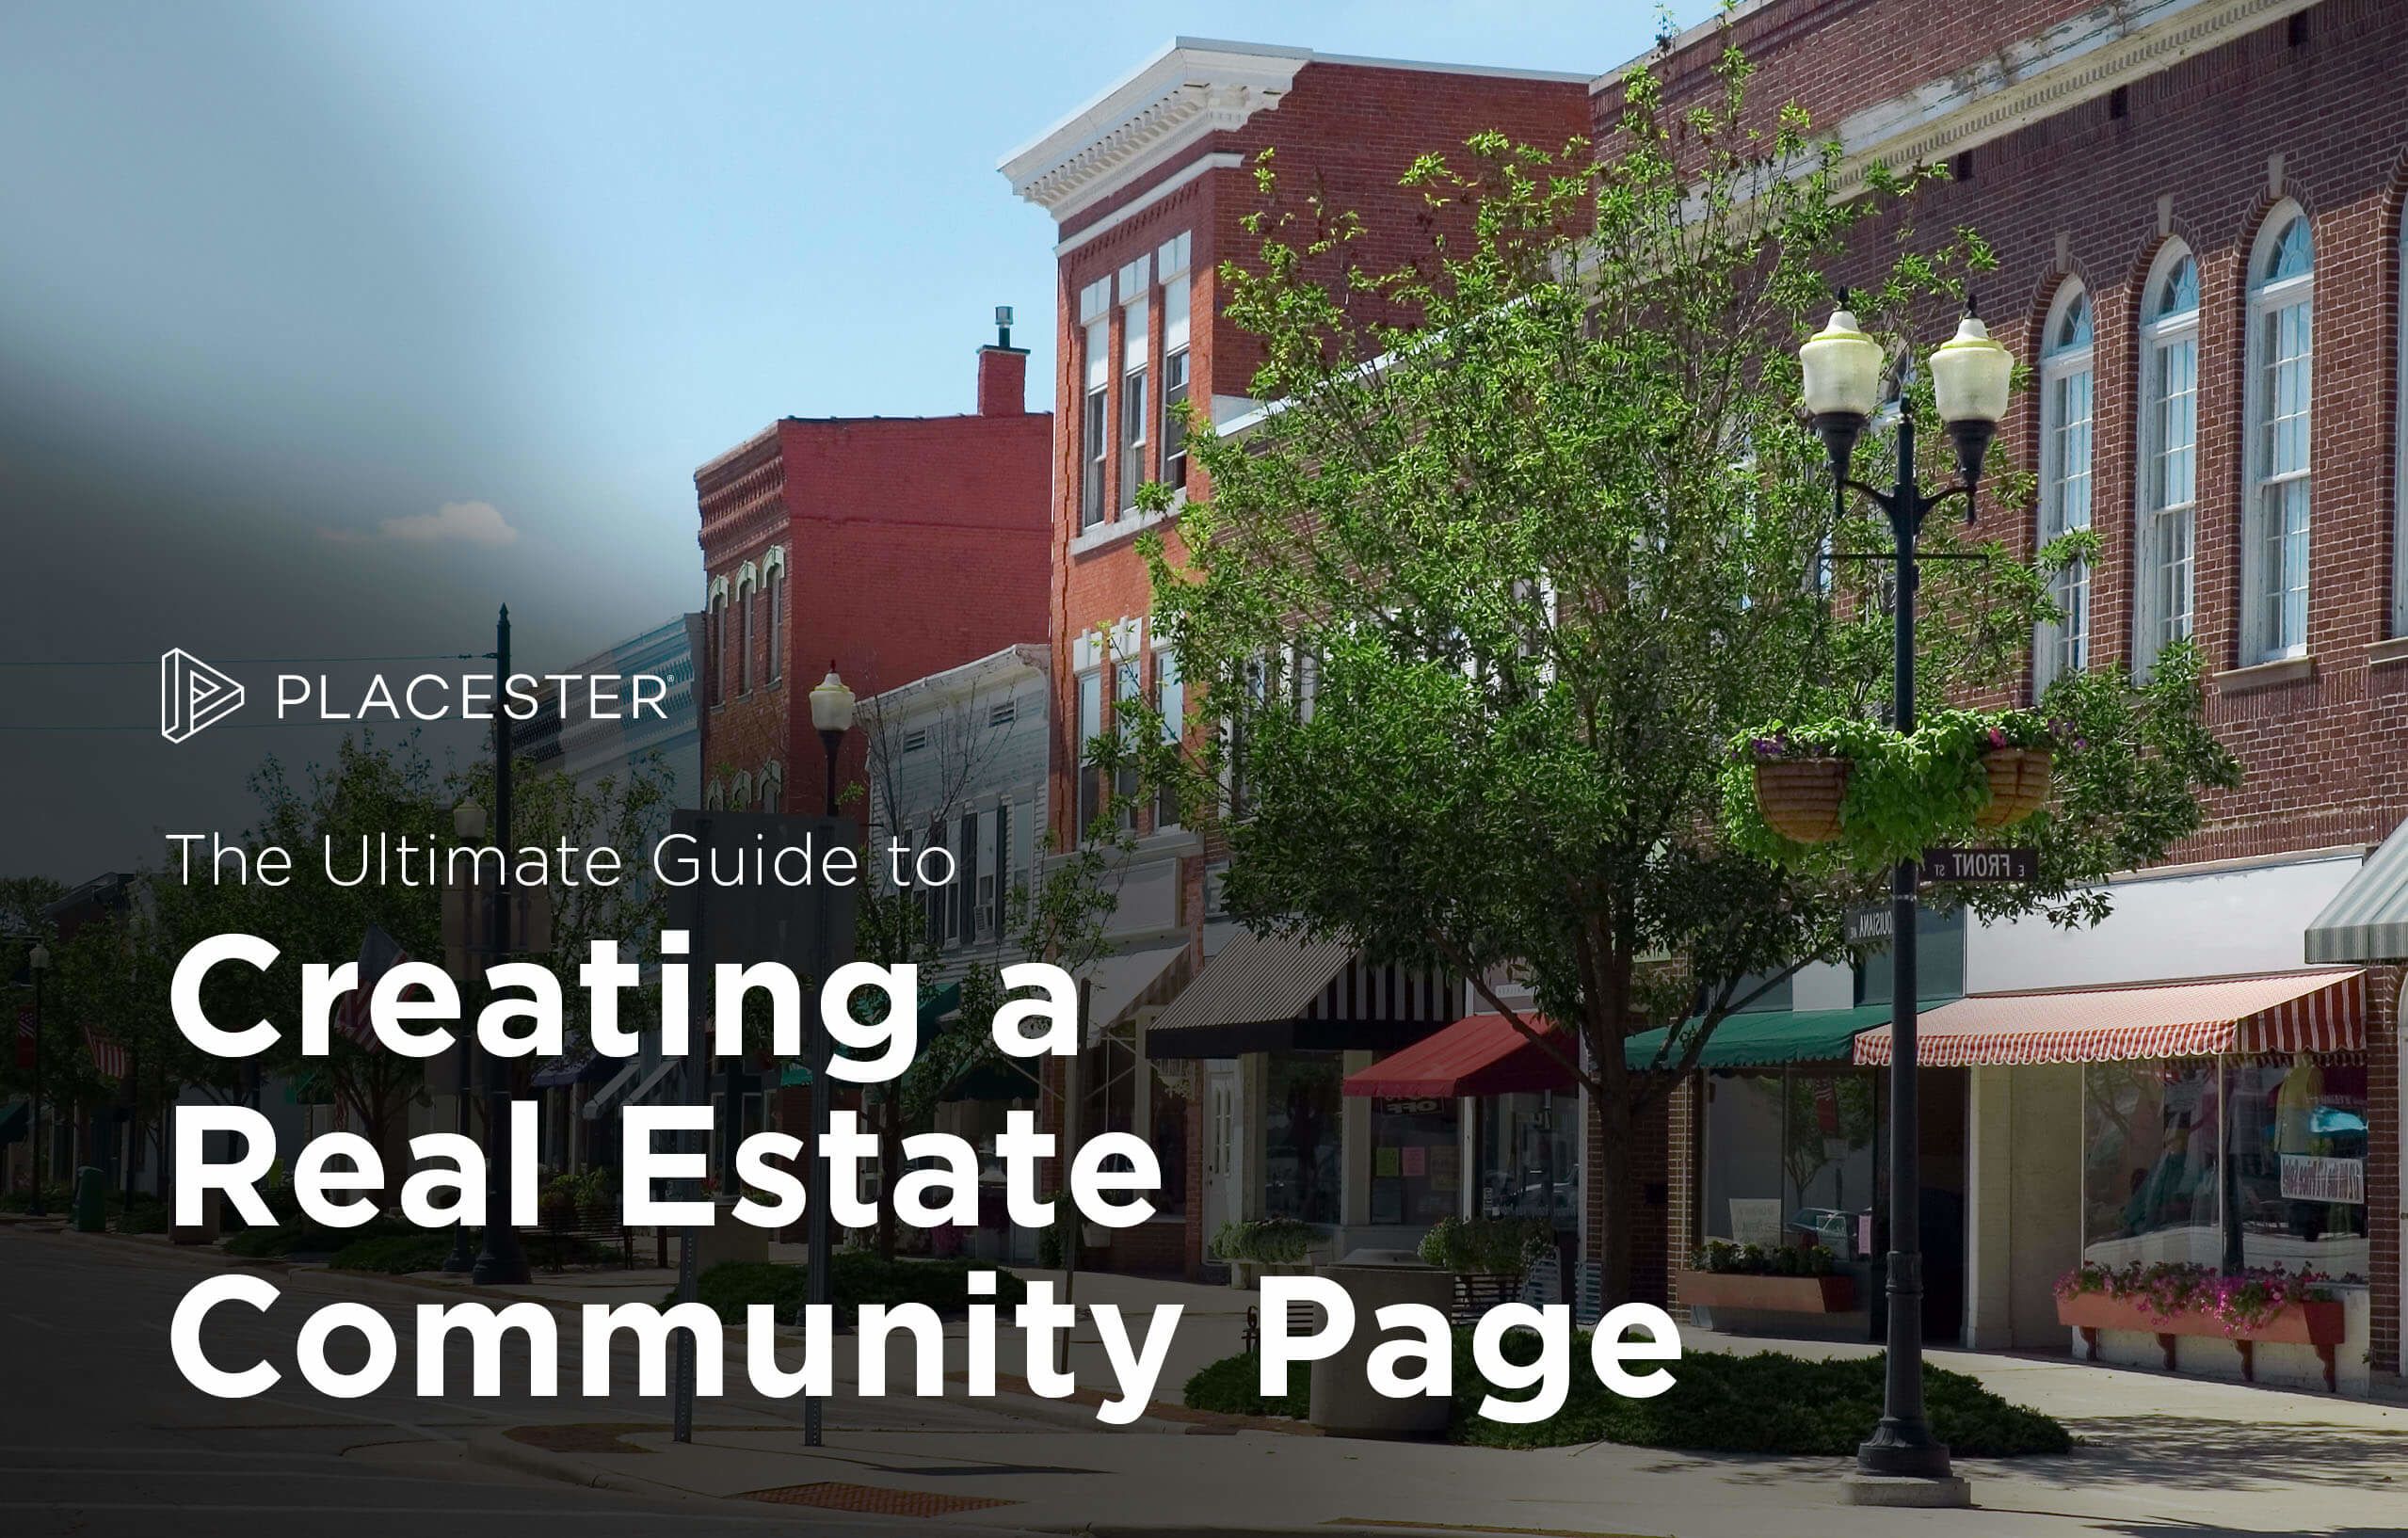 The Ultimate Guide to Creating a Real Estate Community Page